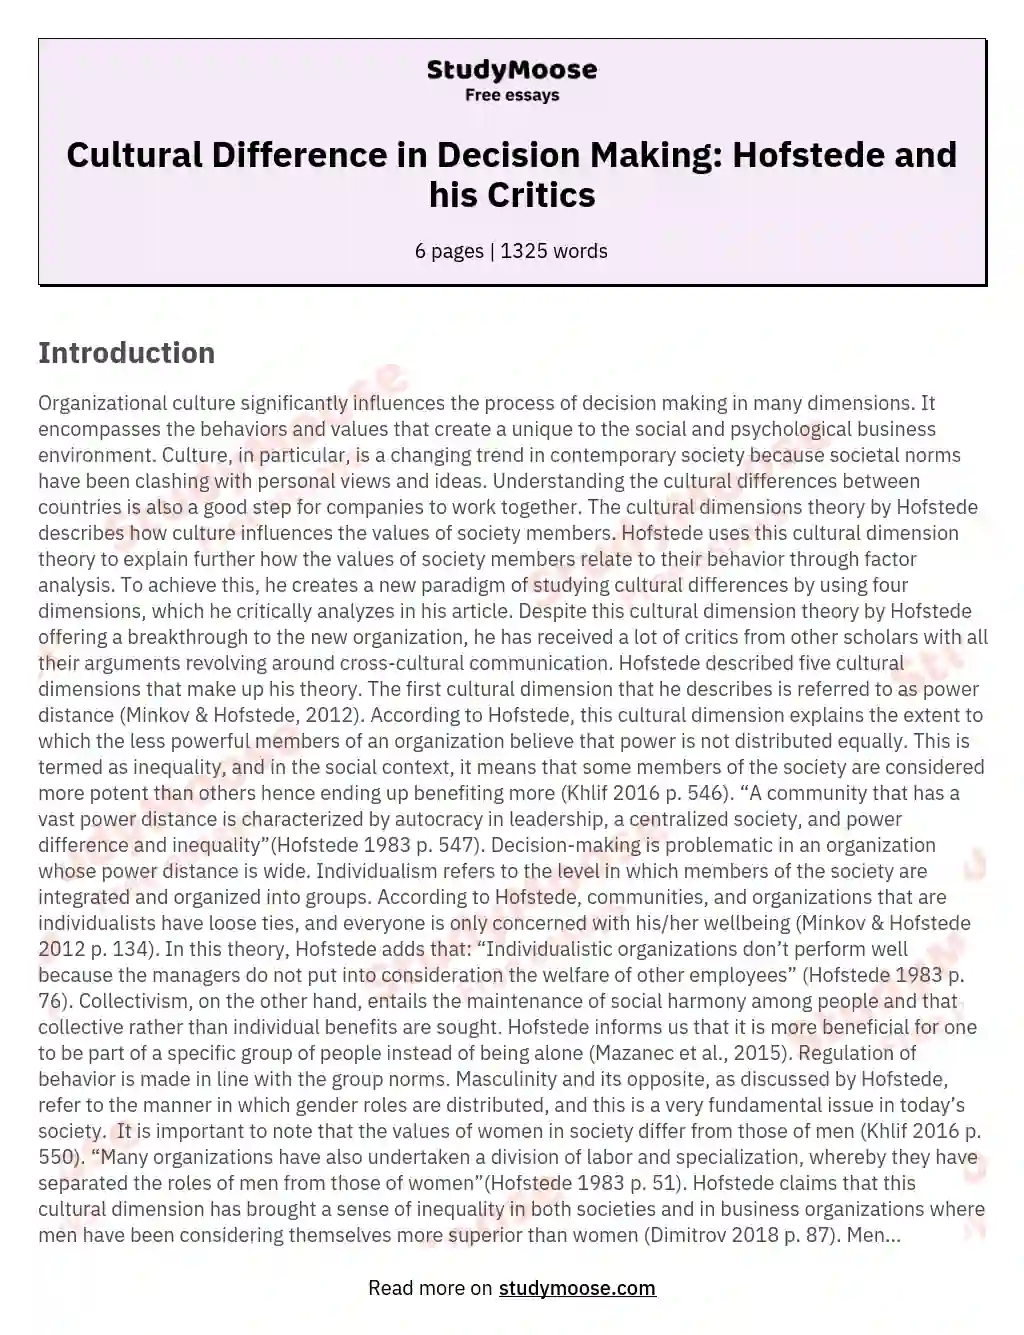 Cultural Difference in Decision Making: Hofstede and his Critics essay